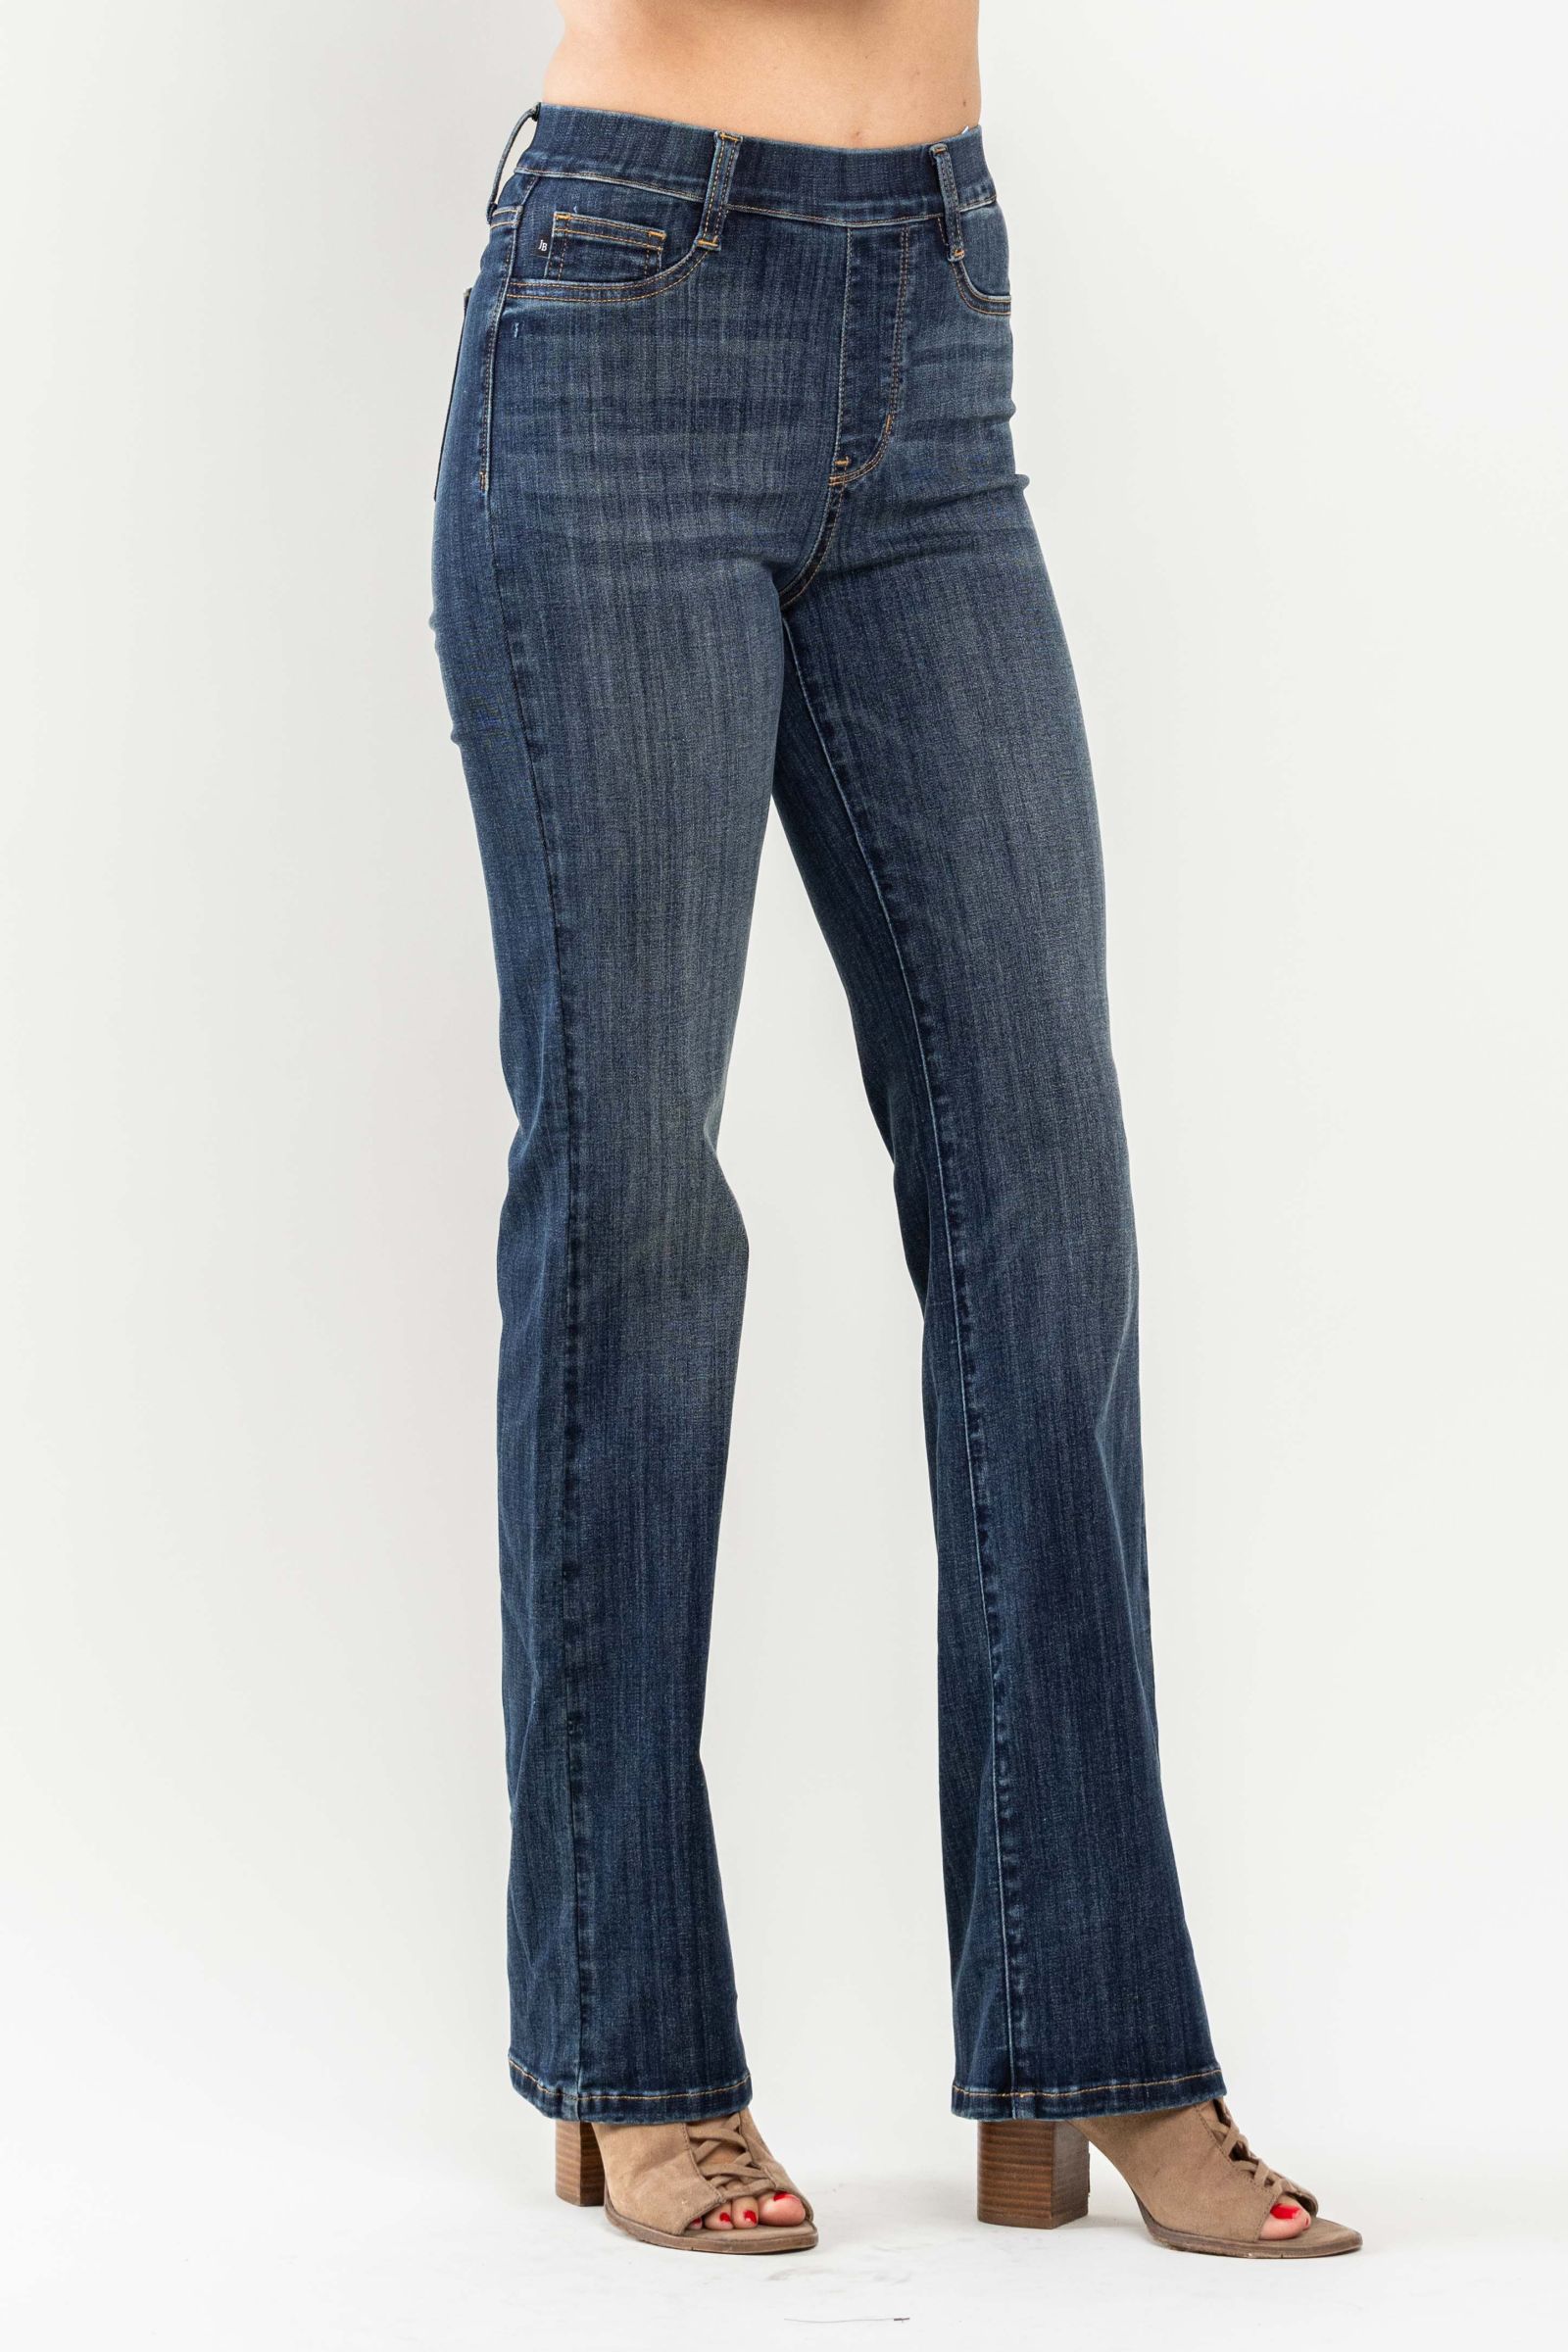 High Waist Vintage Pull On Slim Boot Cut Jean by Judy Blue